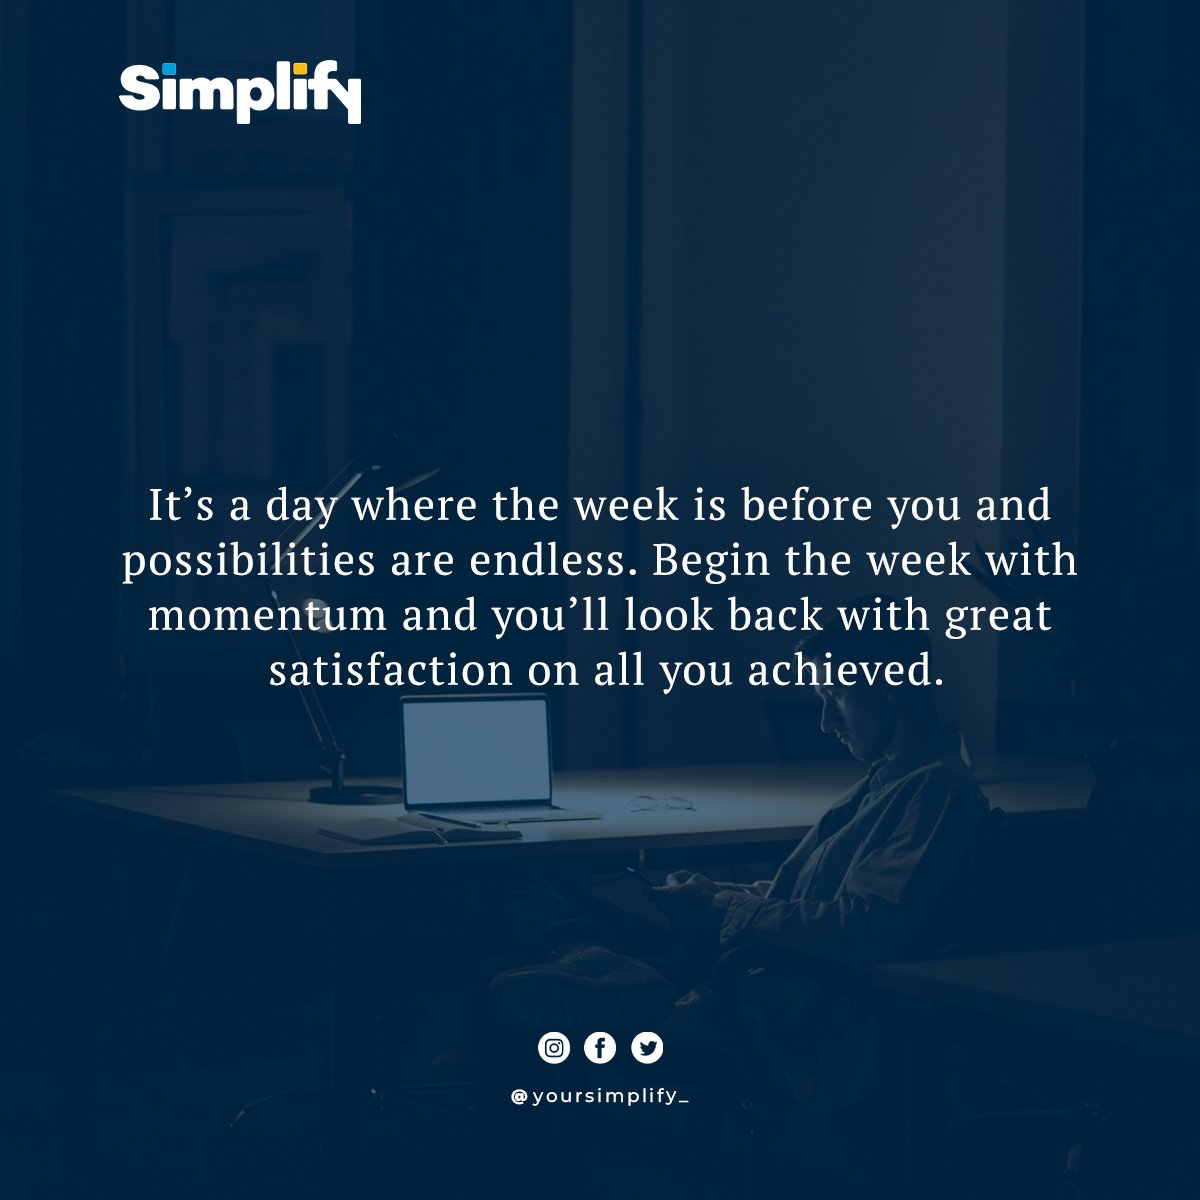 Its Monday again, remember to stay Focused!
Choose Simplicity, choose Simplify

Have a Great week ahead from us @yoursimplify 
#inventorymanagement #pos #software #businesssolution #businessmanagement #simplifyyourbusiness #salesmanagement #erp #receipting #customermanagement